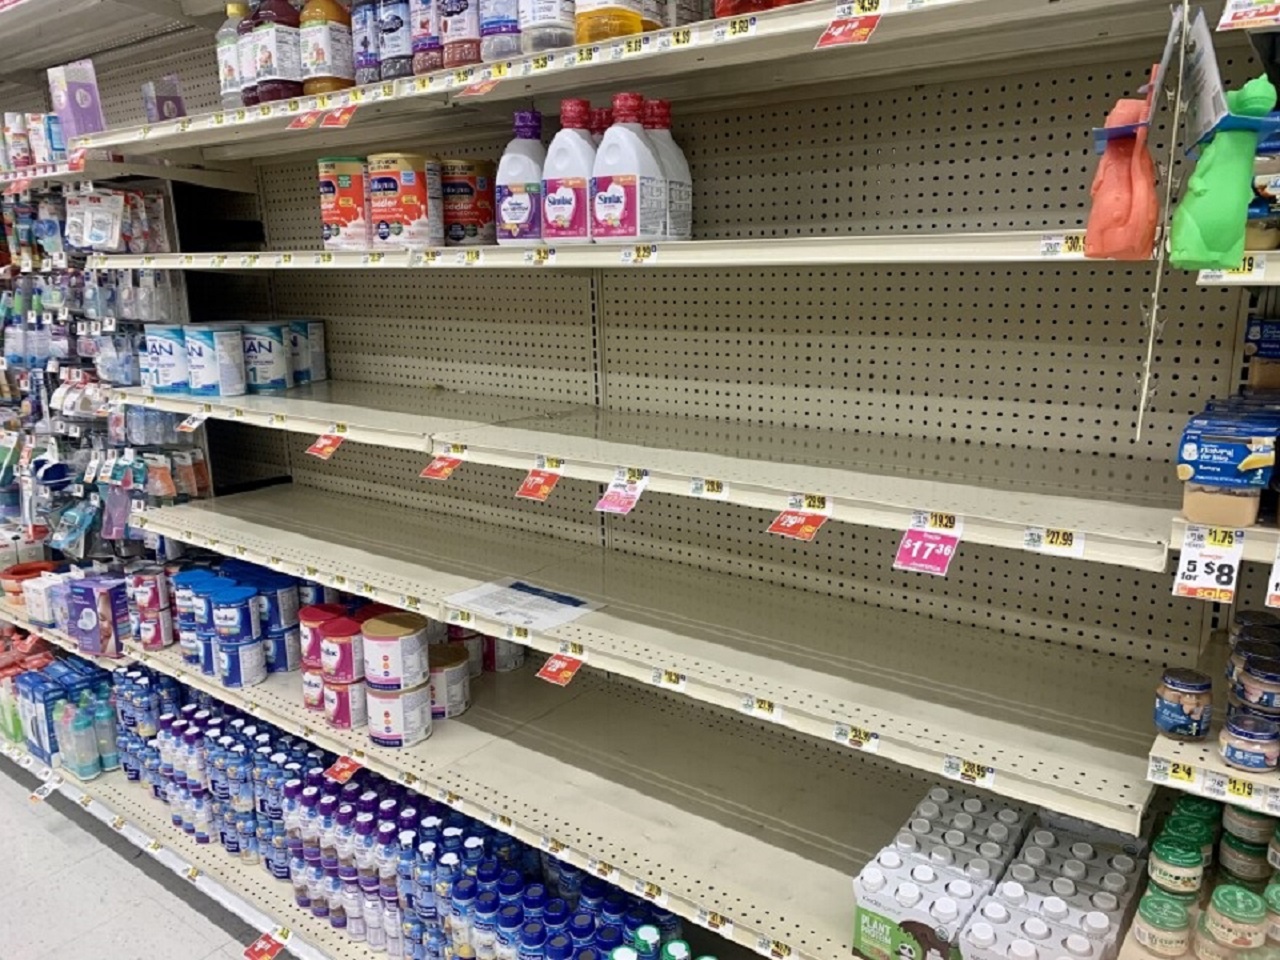 The Weis Markets grocery store on Martin Street in State College has empty baby formula shelves.